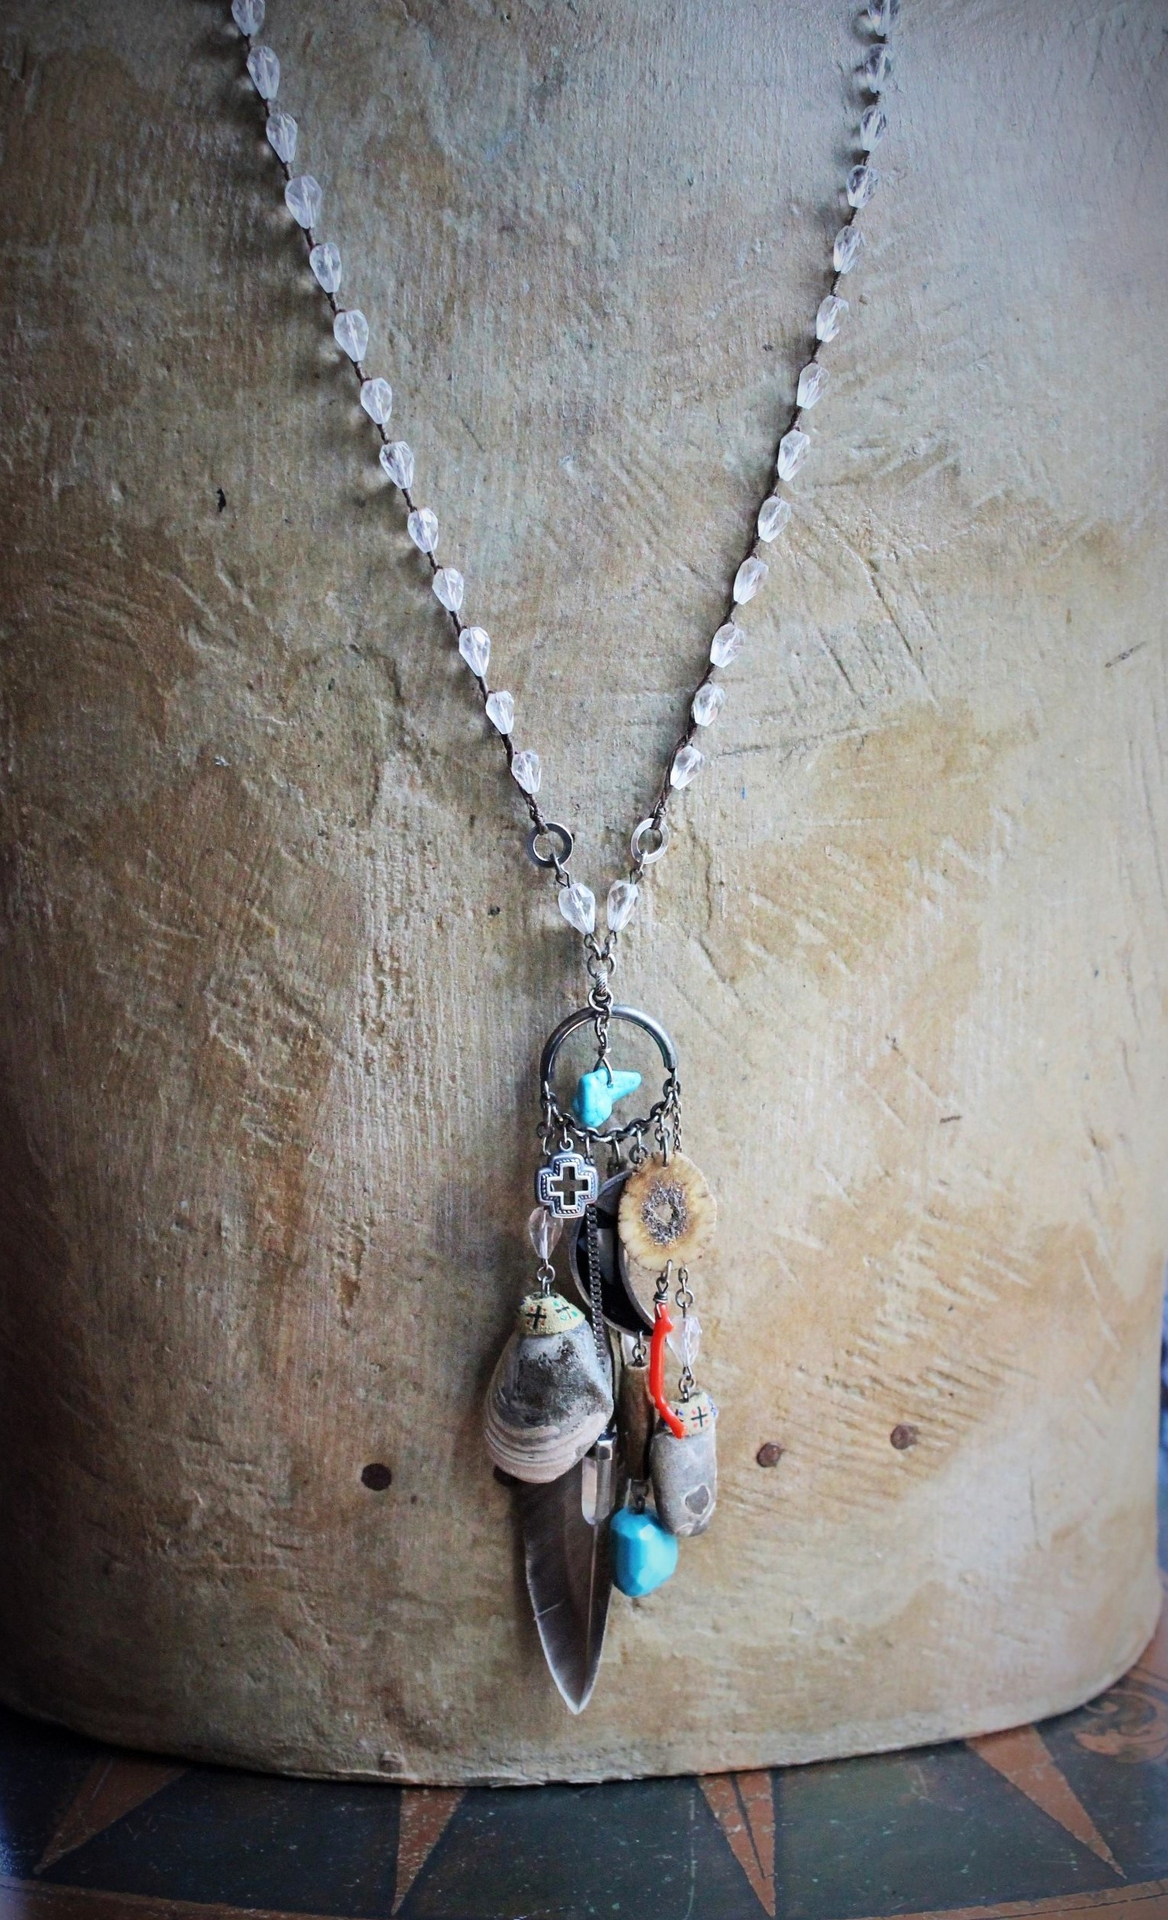 Layaway for L The 4 Elements Amulet Necklace w/Hand Crocheted Rock Crystal Bead Chain, Ancient Shell Fossils,Antique Sterling Inlay Crescent Moon,Rare Faceted Turquoise Nugget,Sterling 4 Way Cross & More!